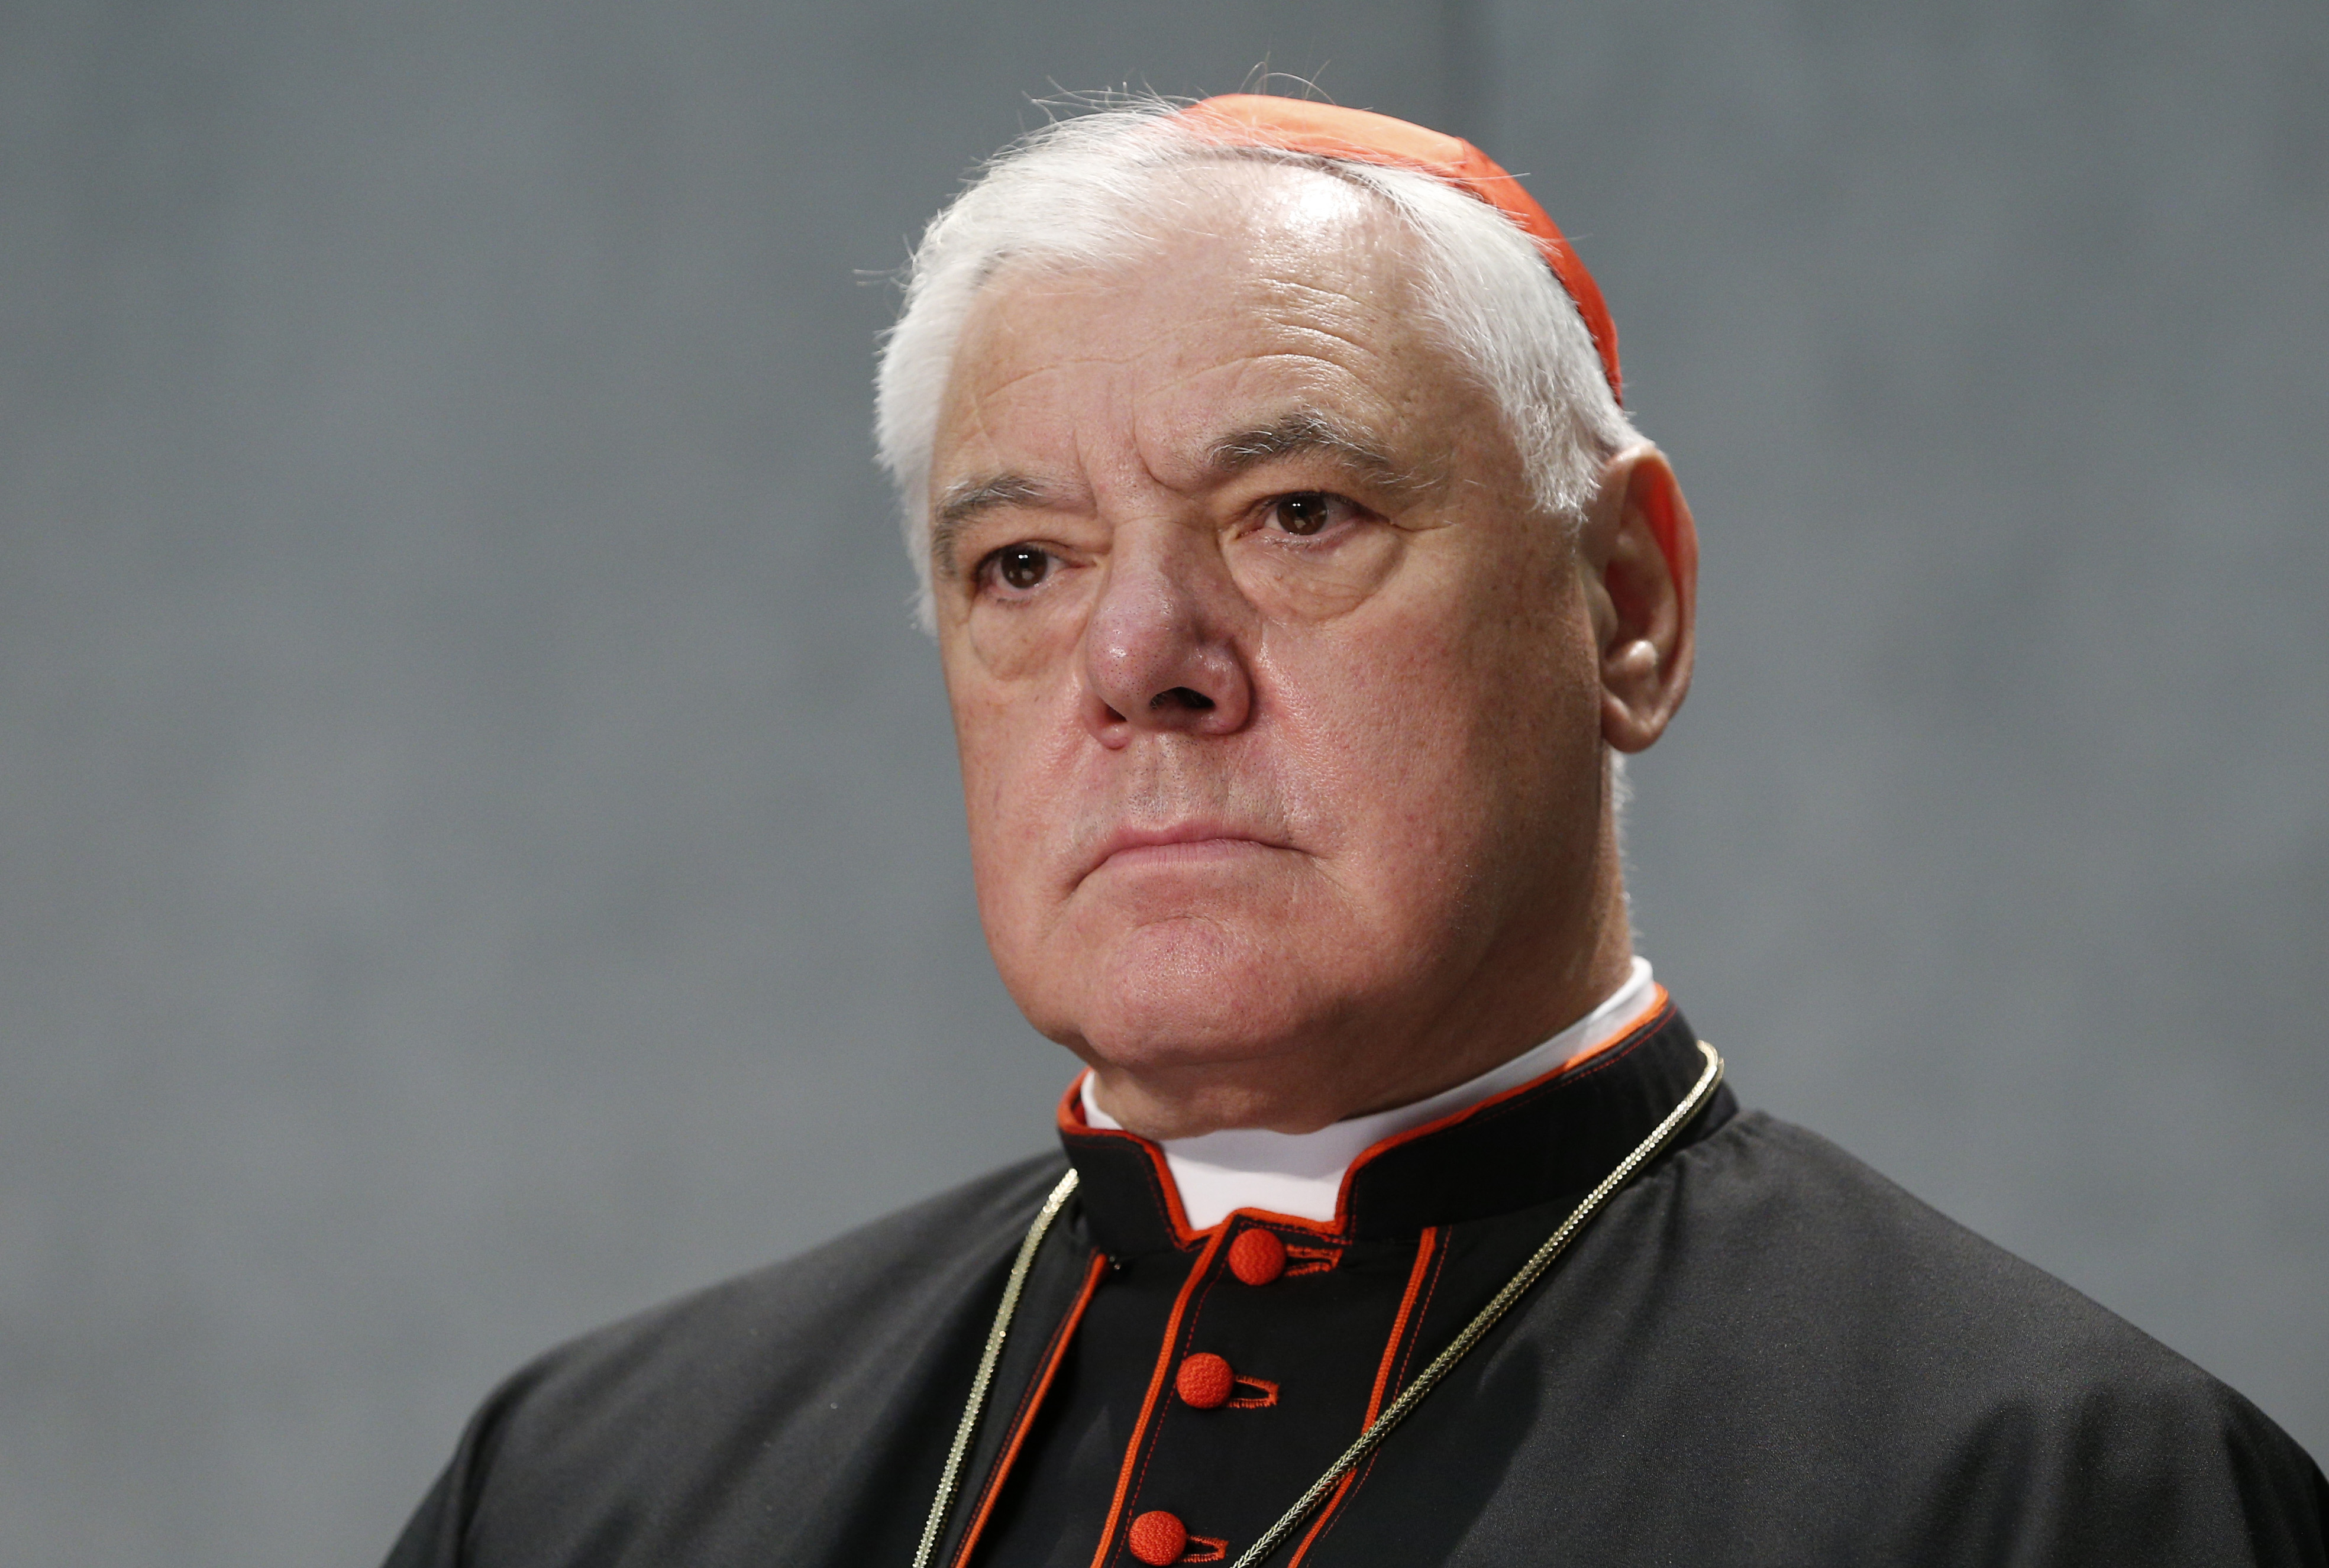 Draft for reform of the Curia ‘deeply flawed’ says Muller